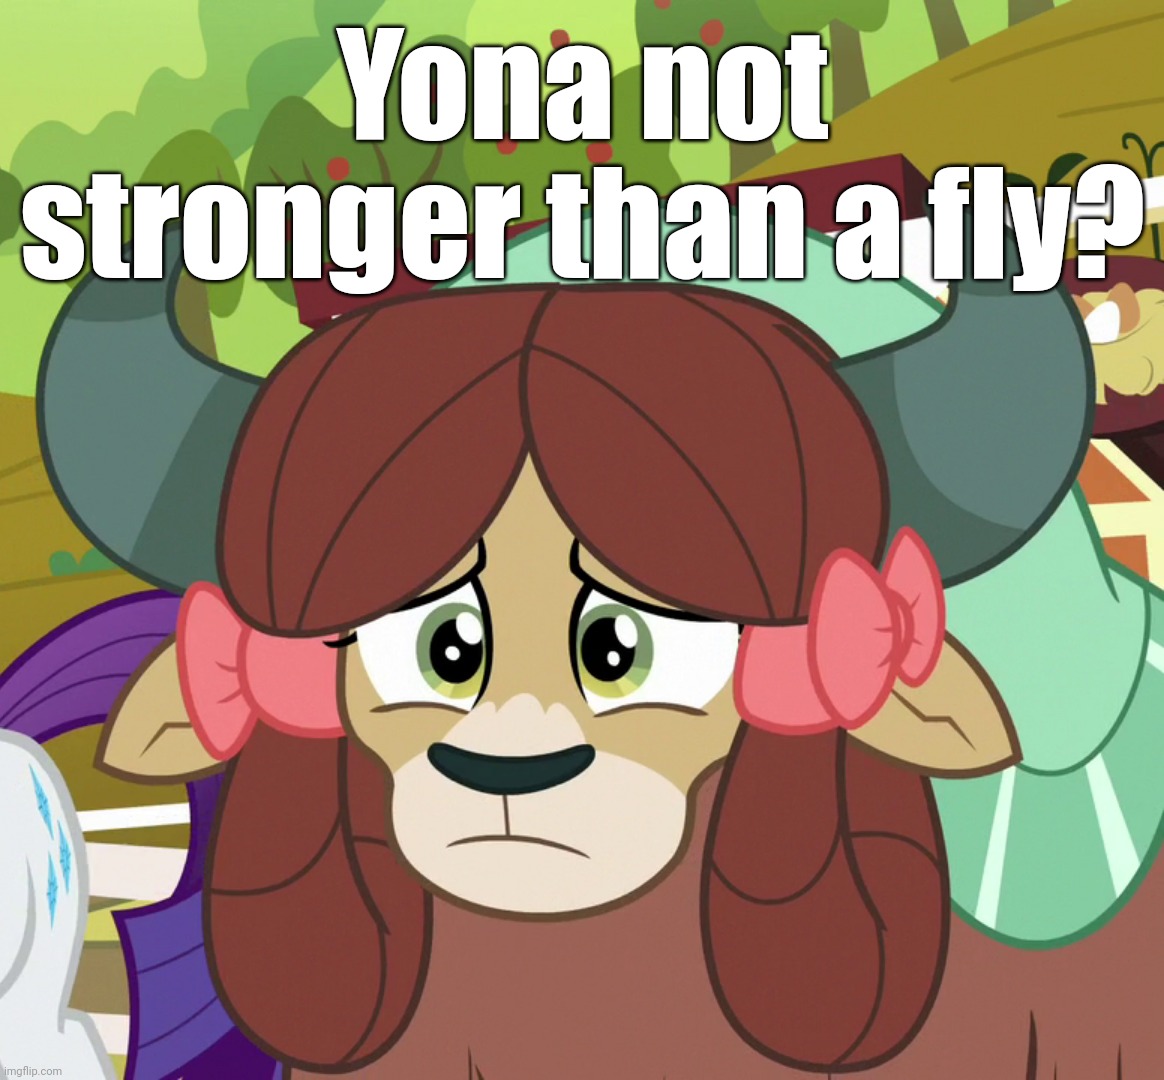 Yona not stronger than a fly? | made w/ Imgflip meme maker